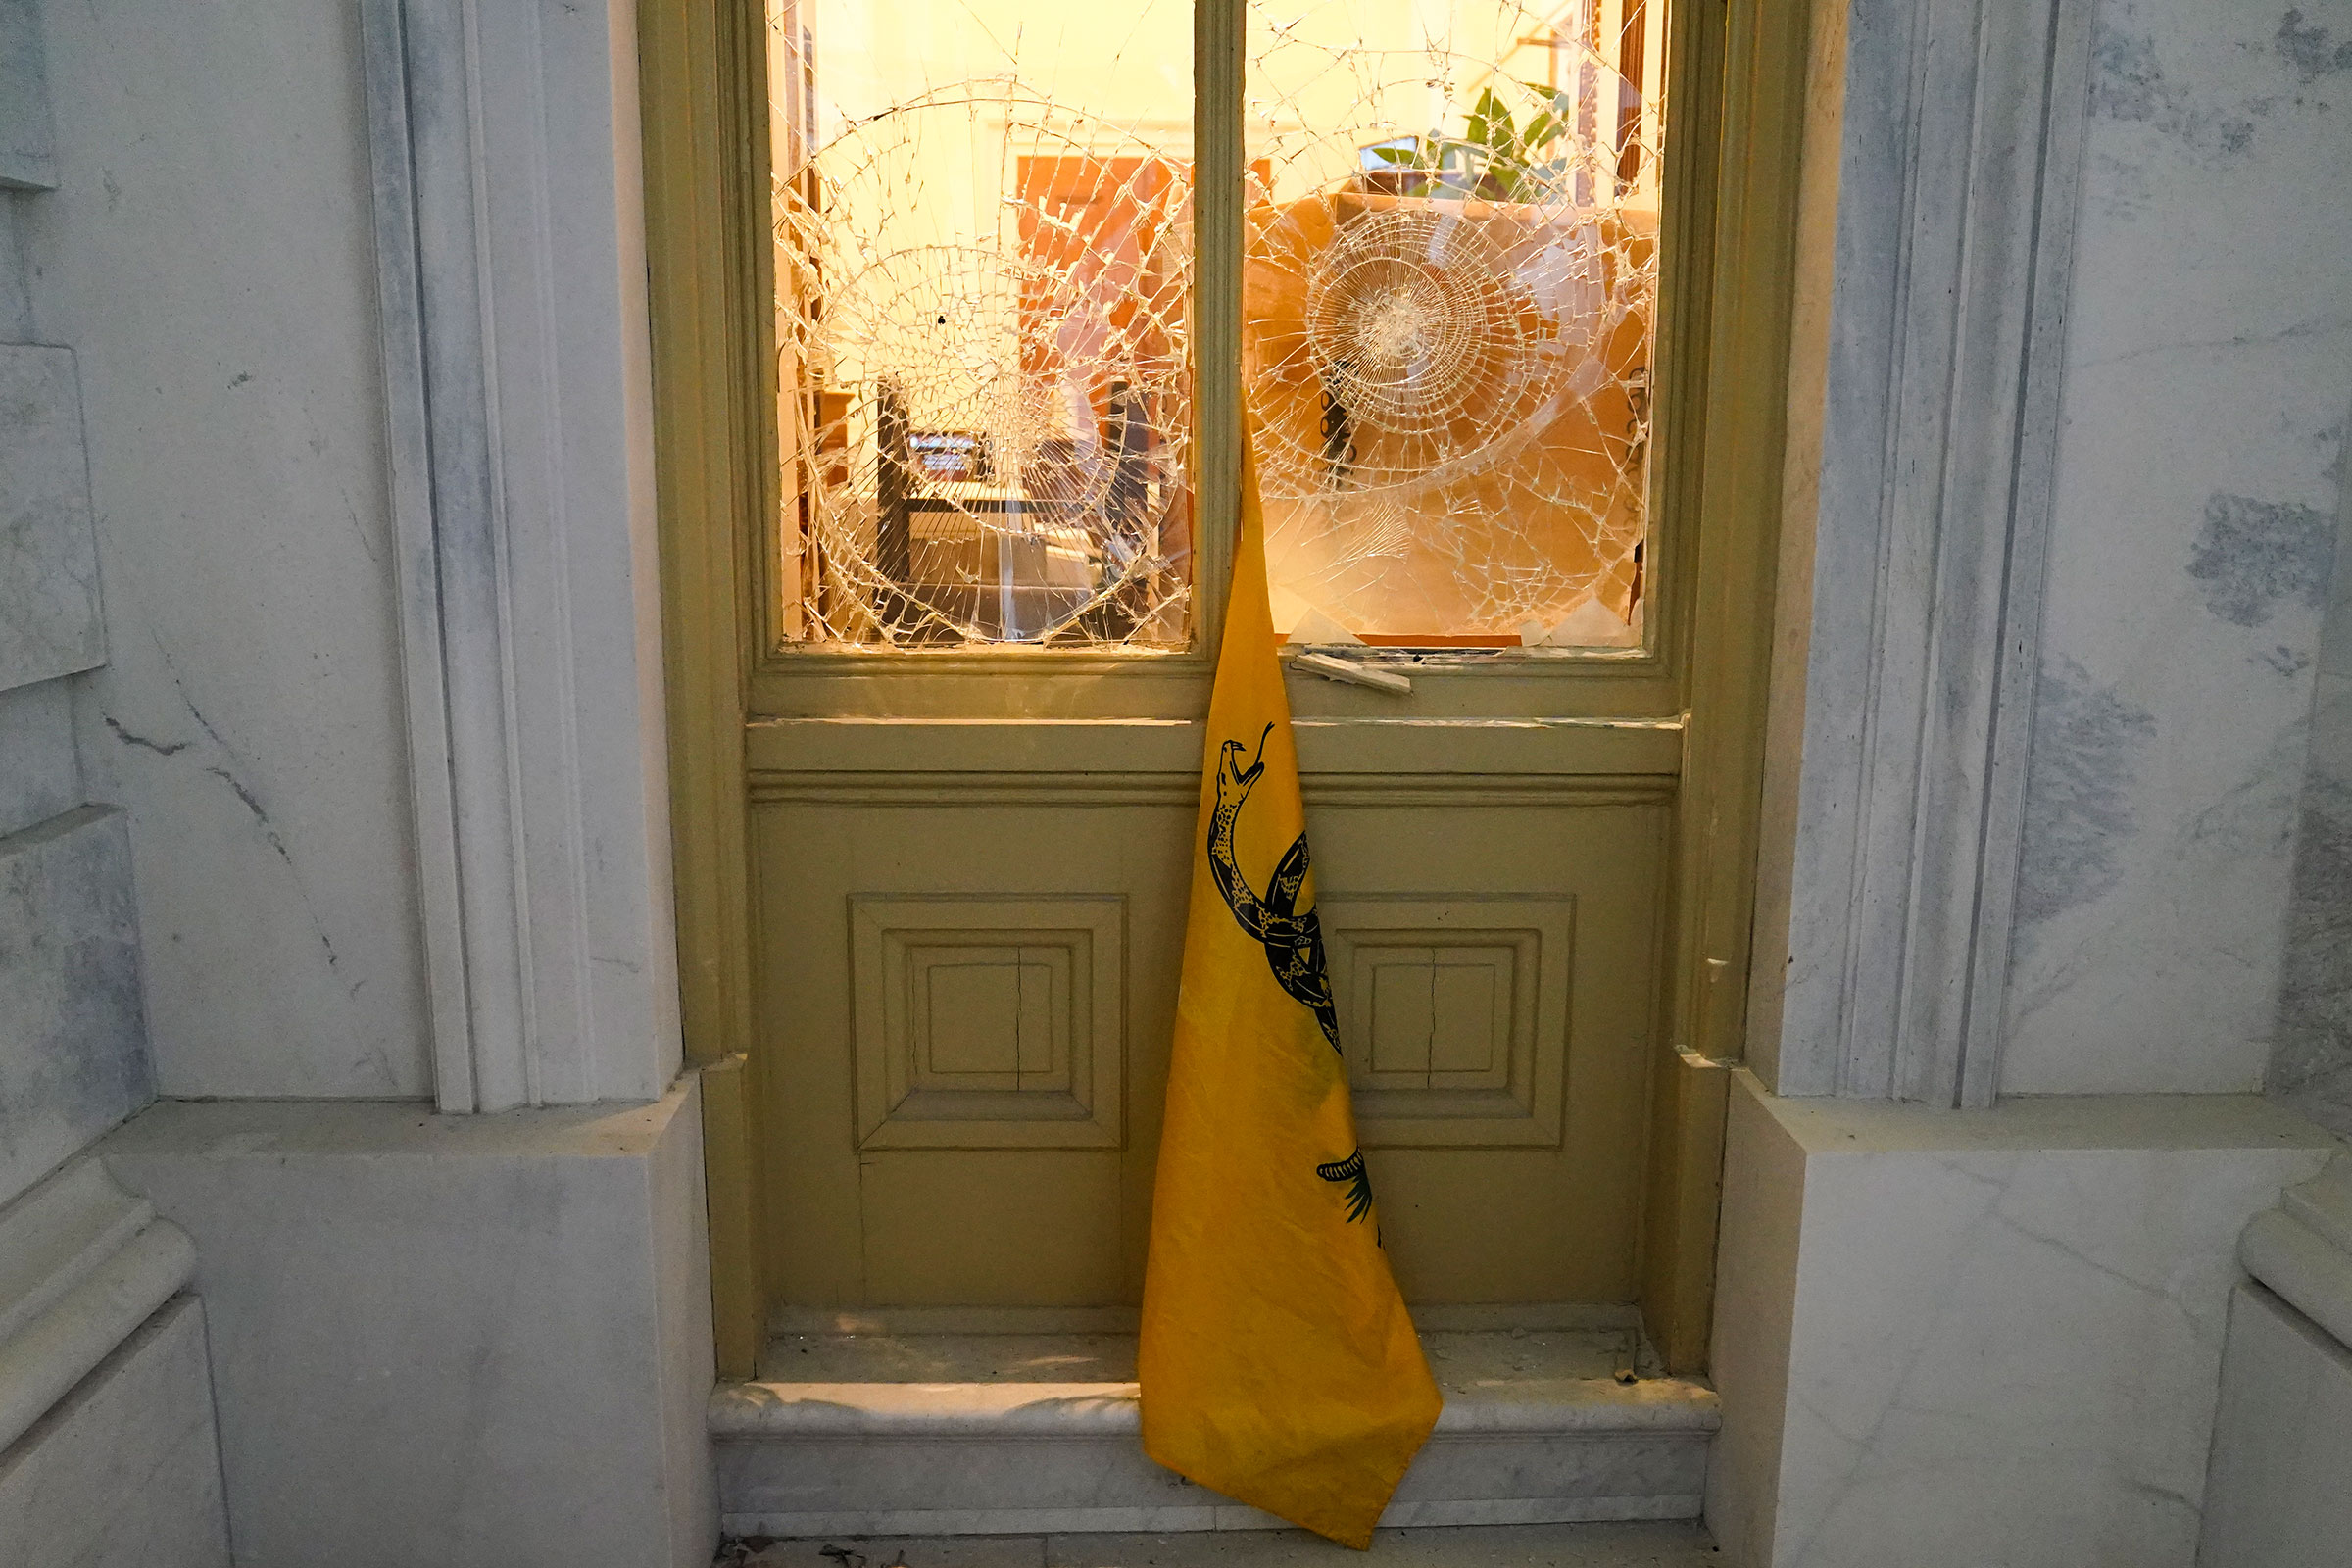 A flag hangs between broken windows after supporters of President Donald Trump tried to break through police barriers outside the Capitol on Jan 6. (John Minchillo—AP)